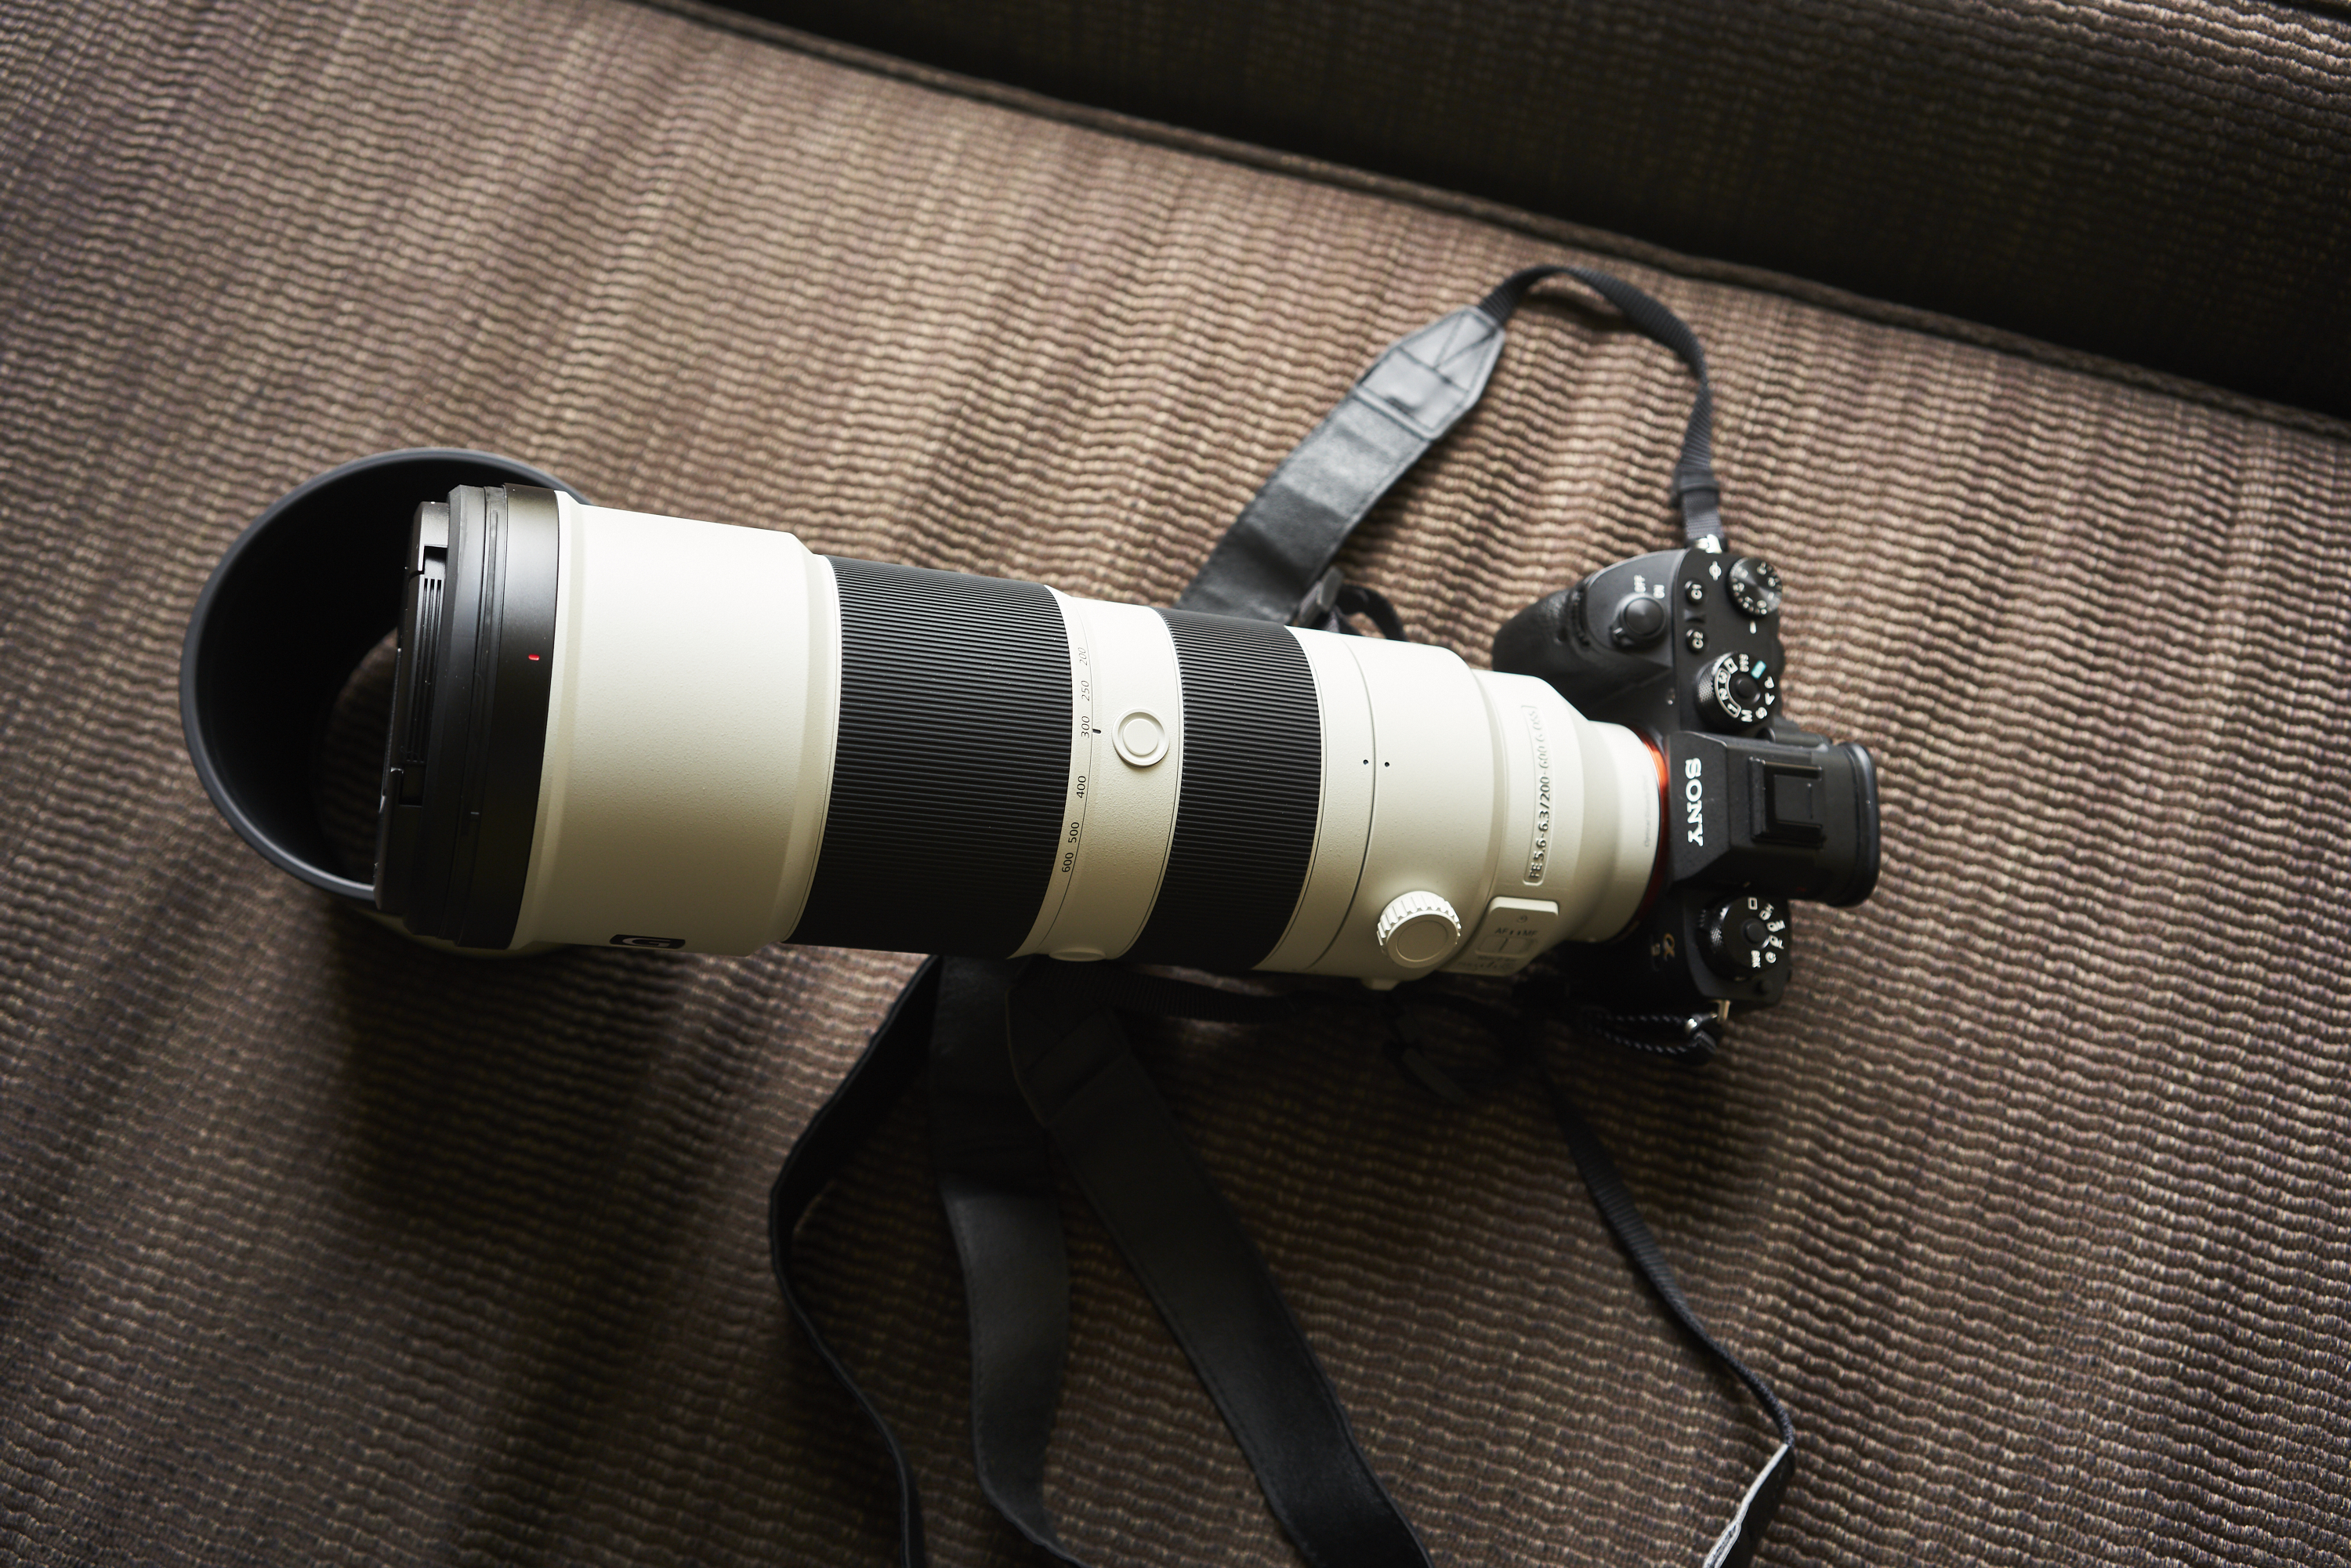 Gear Review: Sony 200-600 f/5.6-6.3 G Telephoto Lens